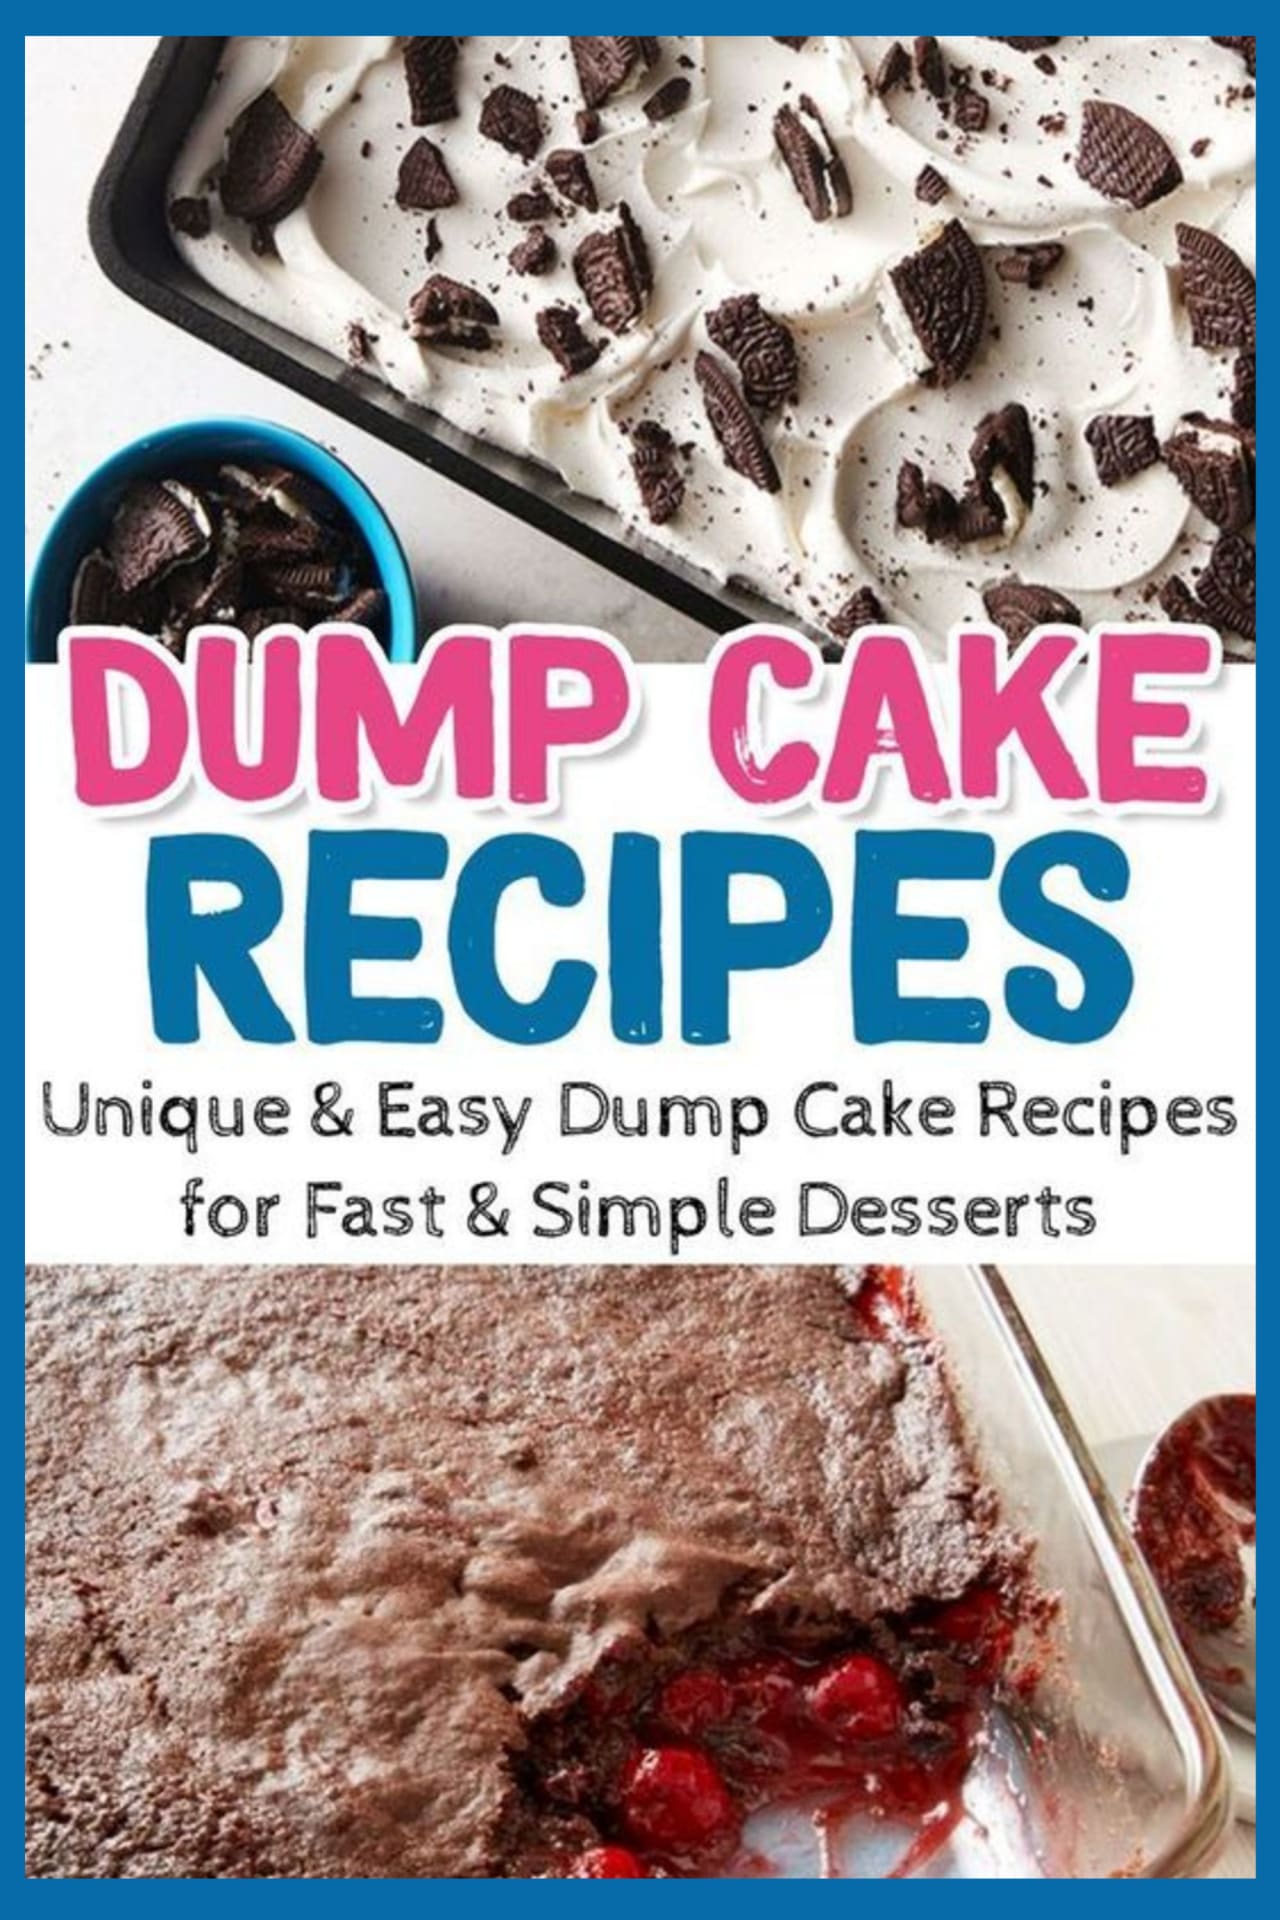 Super SIMPLE desserts - easy dump cake 3 ingredients dessert recipes with 3-4 ingredients - easy dessert ideas for a crowd, brunch, party desserts, funeral food, cookout, block party, family reunion or potluck dessert ideas too